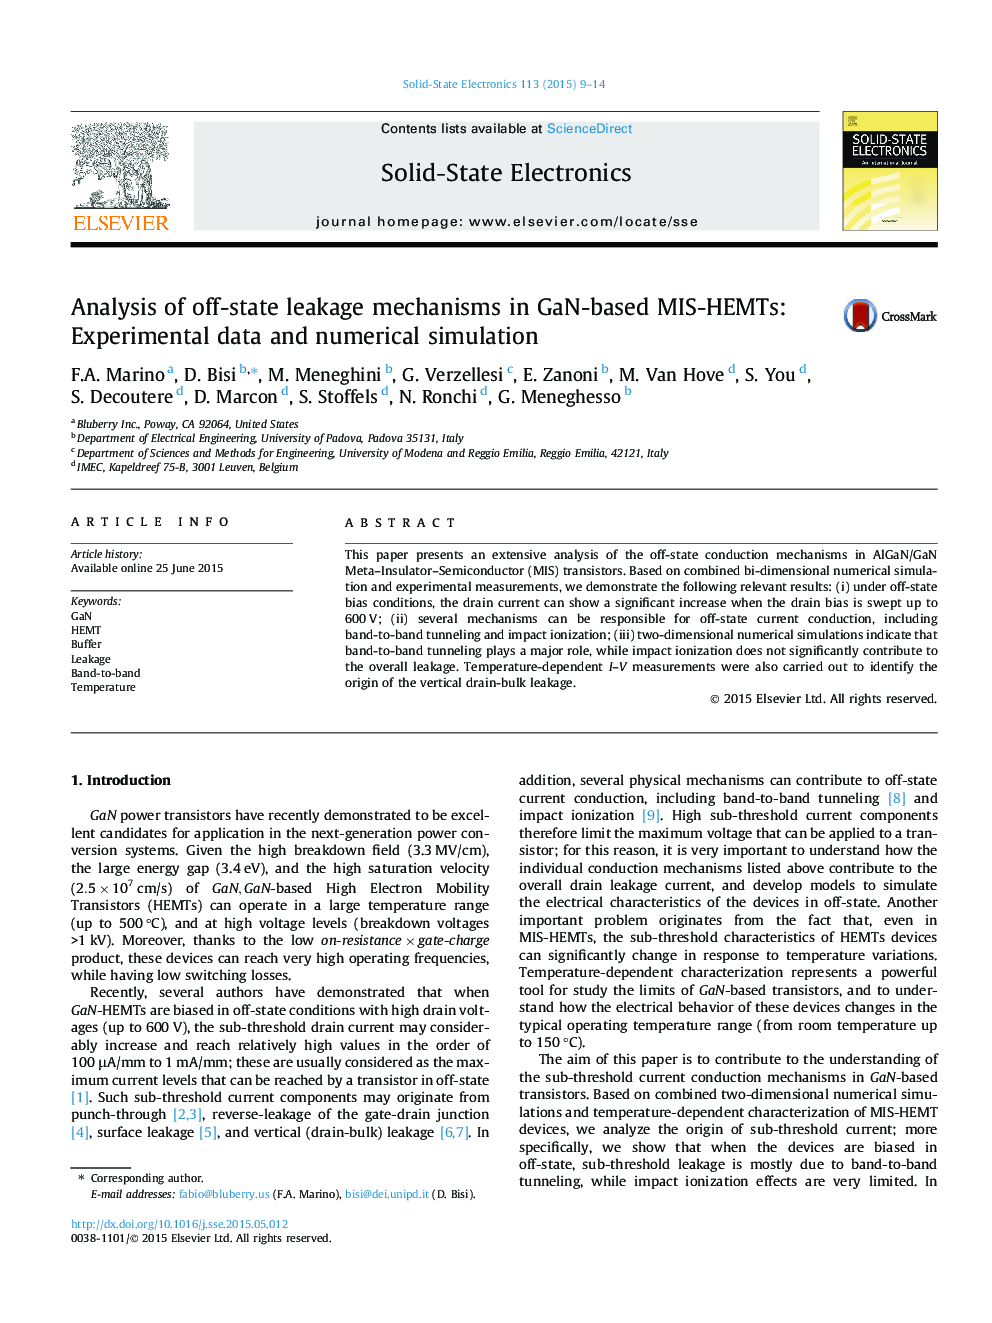 Analysis of off-state leakage mechanisms in GaN-based MIS-HEMTs: Experimental data and numerical simulation